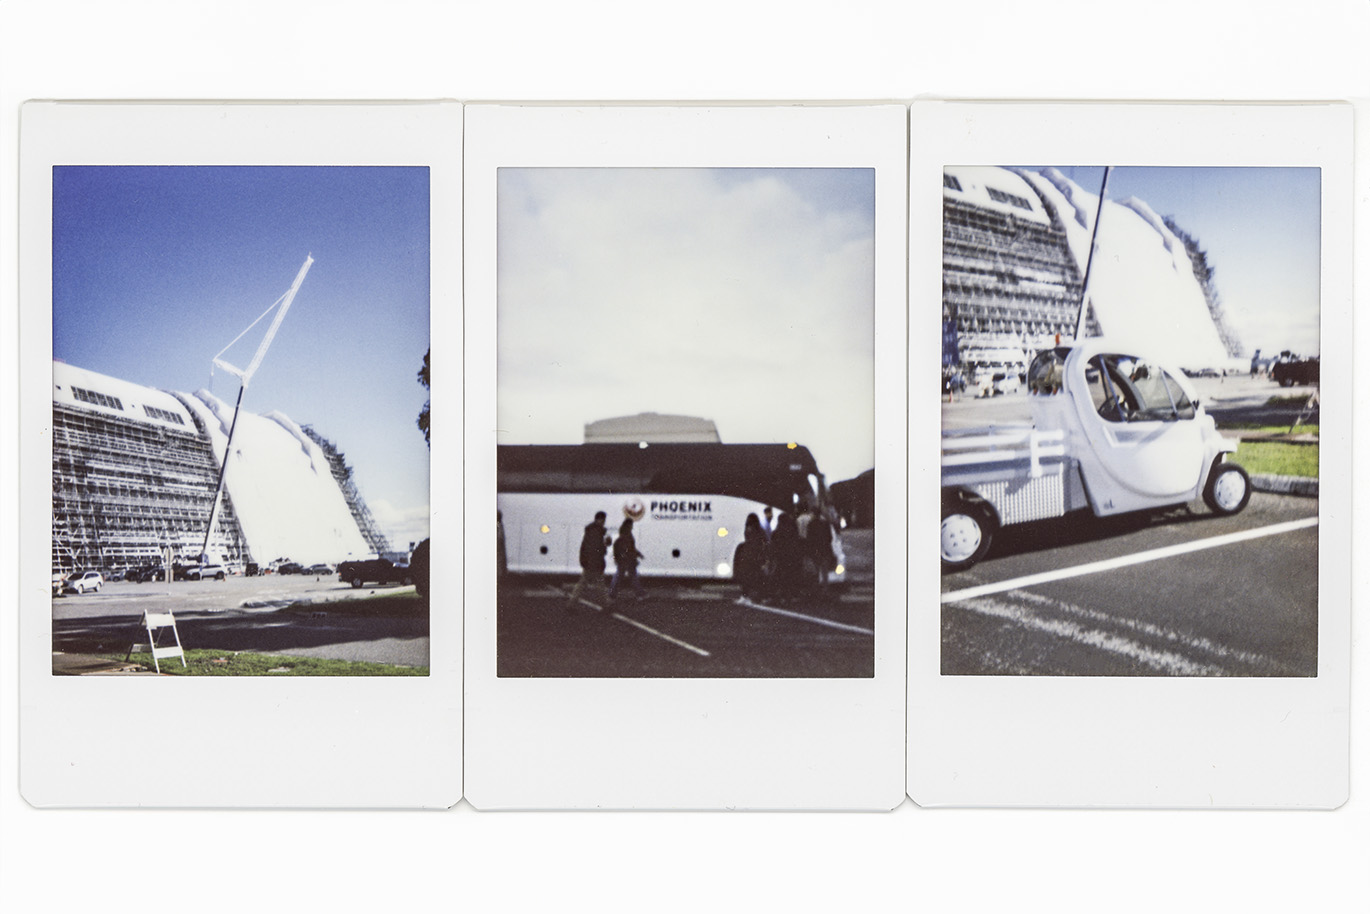 Set of three scanned polaroid photos showing large building, a bus and a specialty vehicle that resamples a truck.